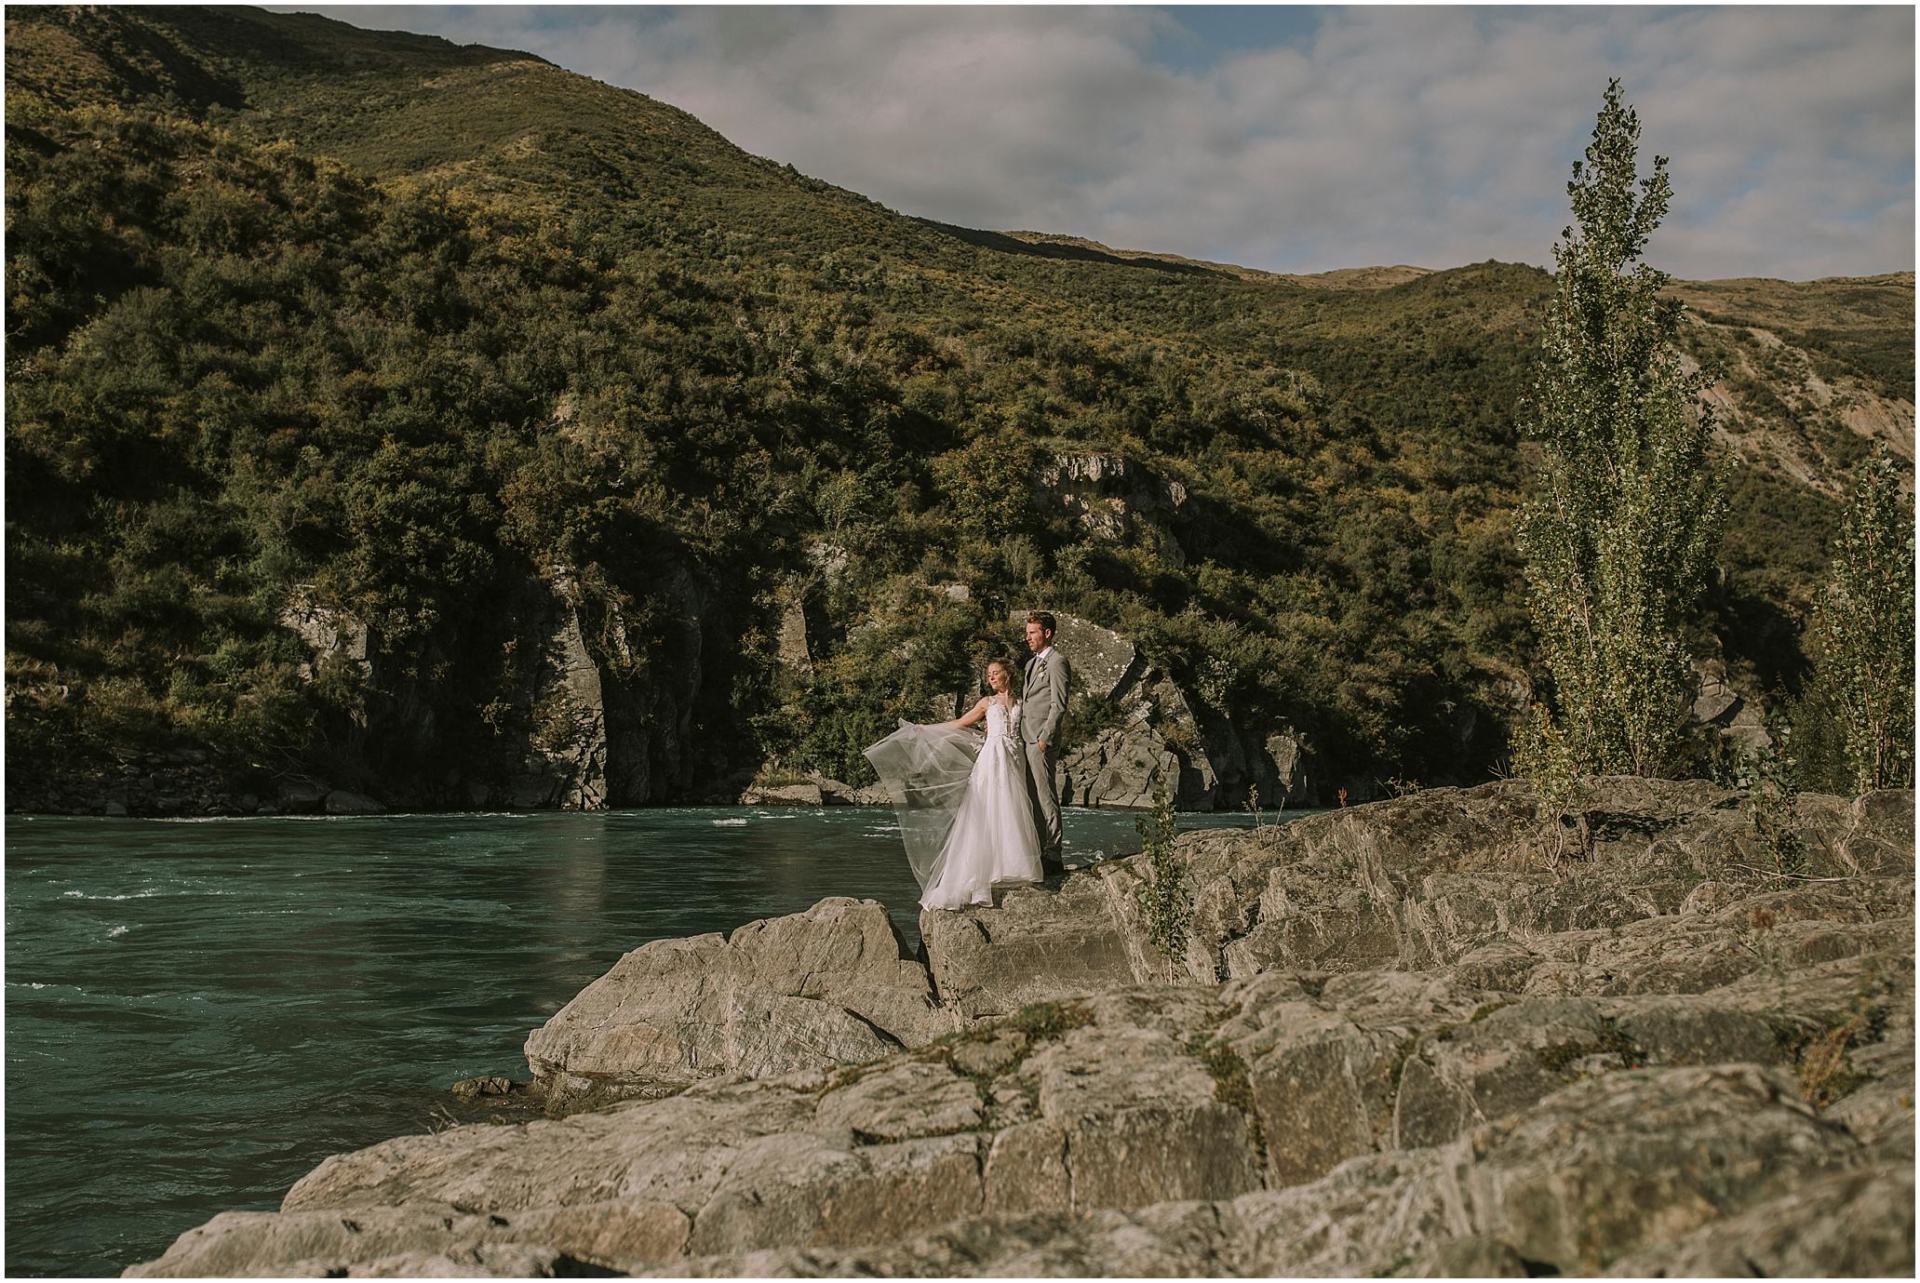 Charlotte Kiri Photography - Wedding Photography of a bride wearing a pretty strapless gown and throwing her veil into the wind, as she stands next to her groom who is wearing a smart grey suit, as they stand on rocks overlooking a stunning lake with mountains behind in Queenstown, New Zealand.